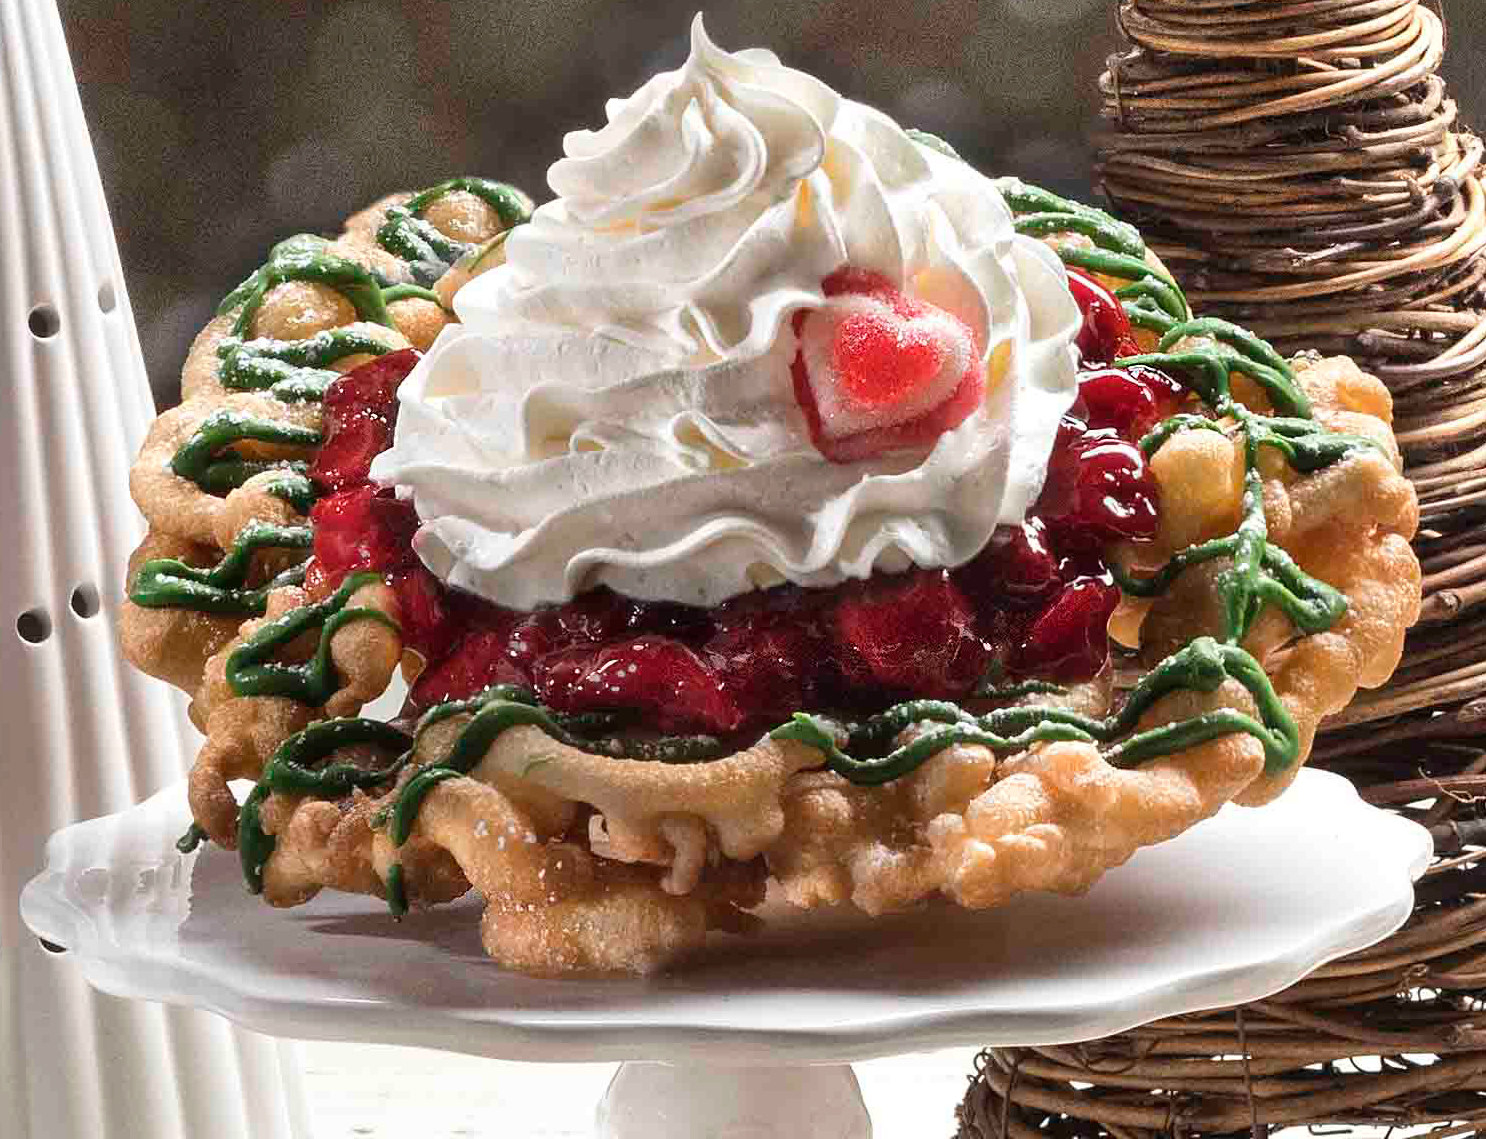 Funnel cake with toppings